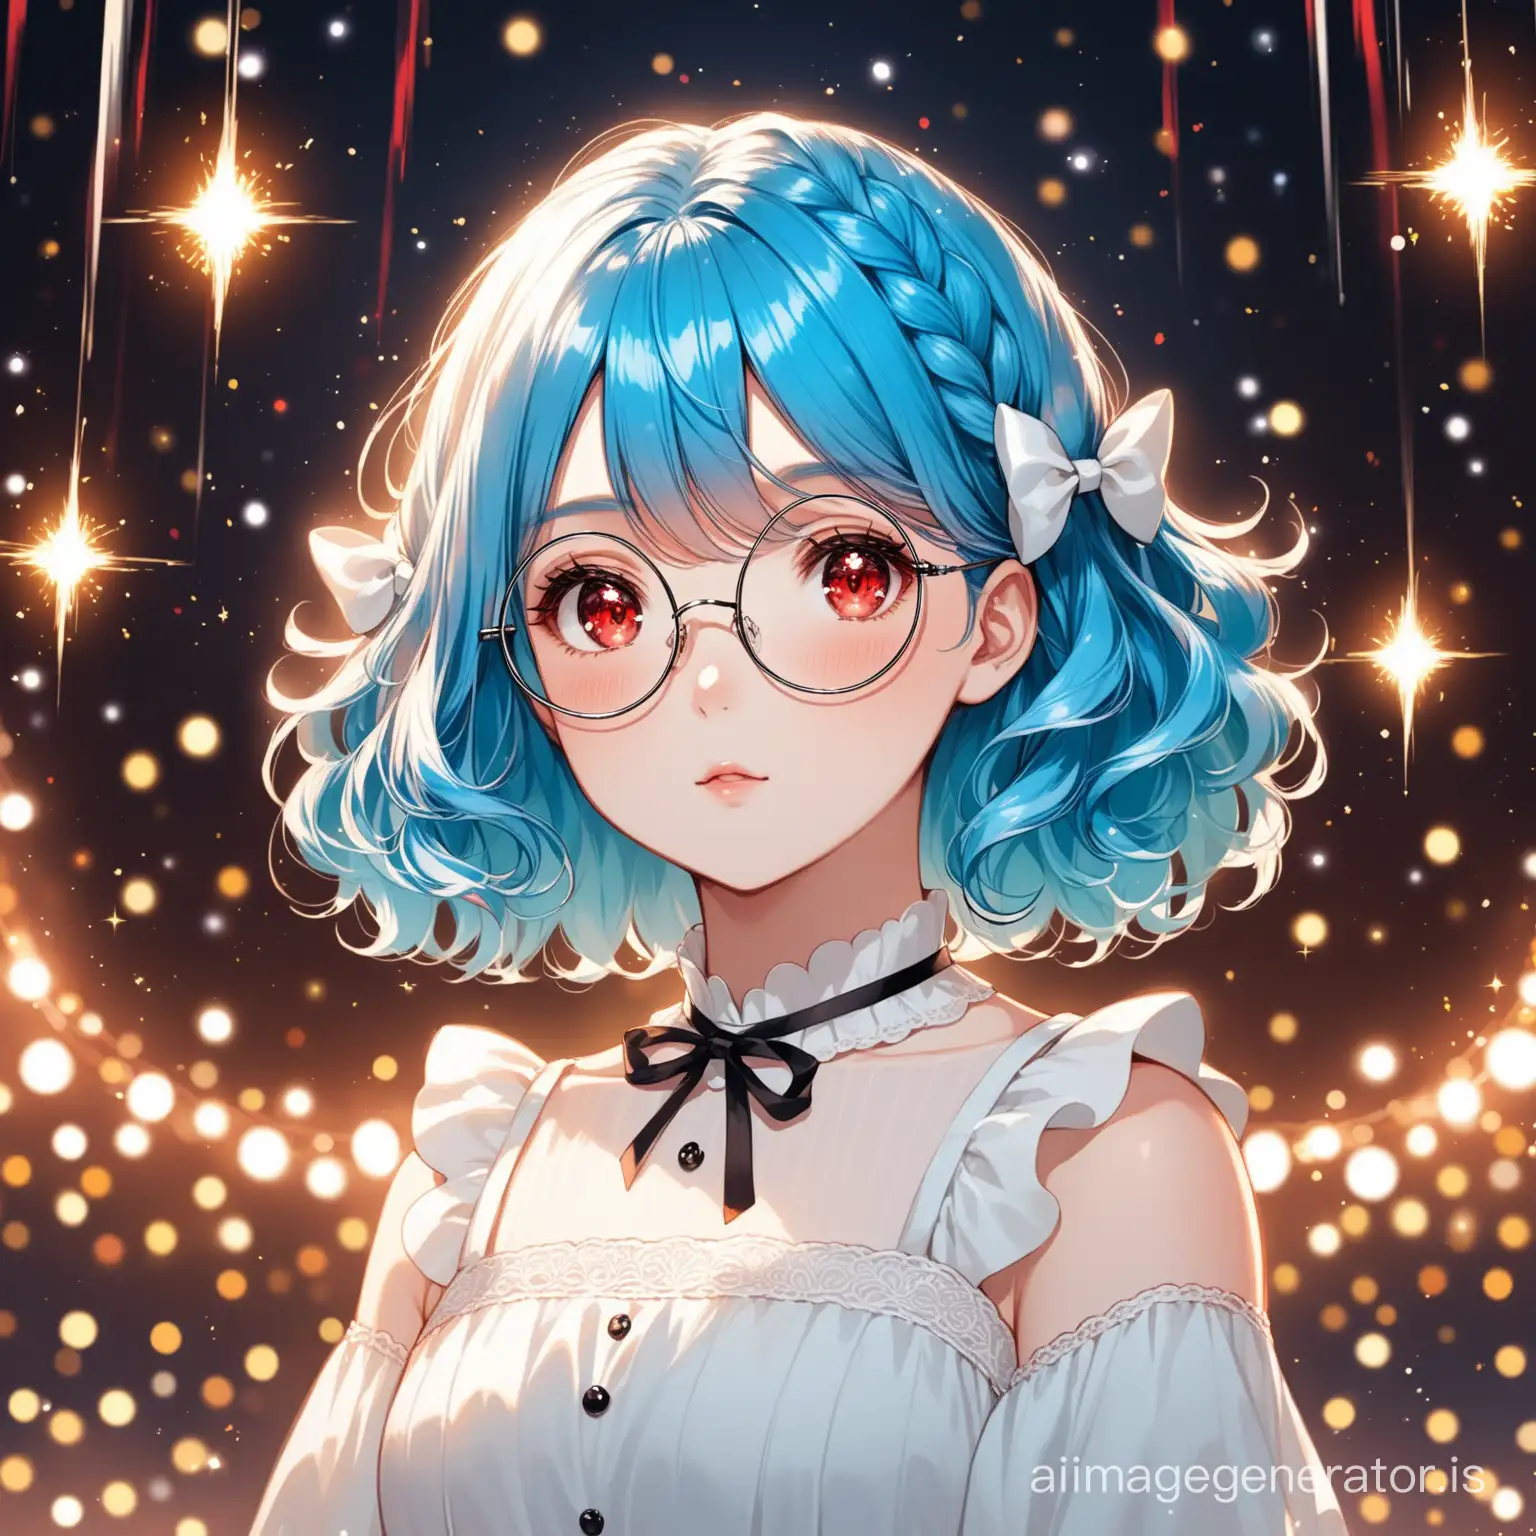 The girl with blue hair, her hair shimmers red, she has red eyes, wearing big round glasses, in a beautiful black and white dress, her hair is slightly curly, there are 2 cute white bows on her head, in the background there are a few sparks resembling lights